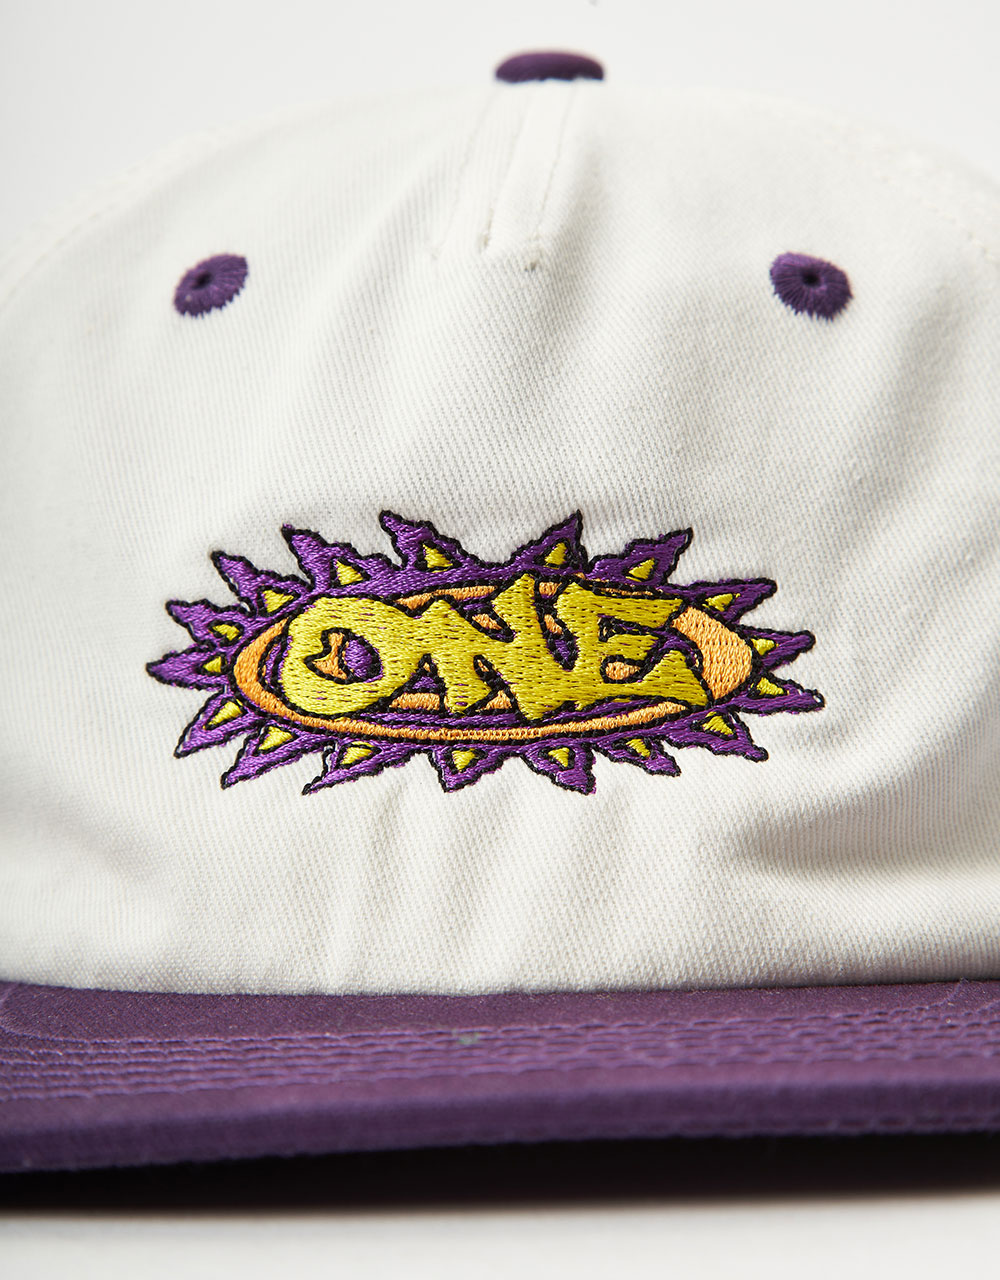 Route One Twisted Unstructured Strapback Cap - Raw/Moderate Purple